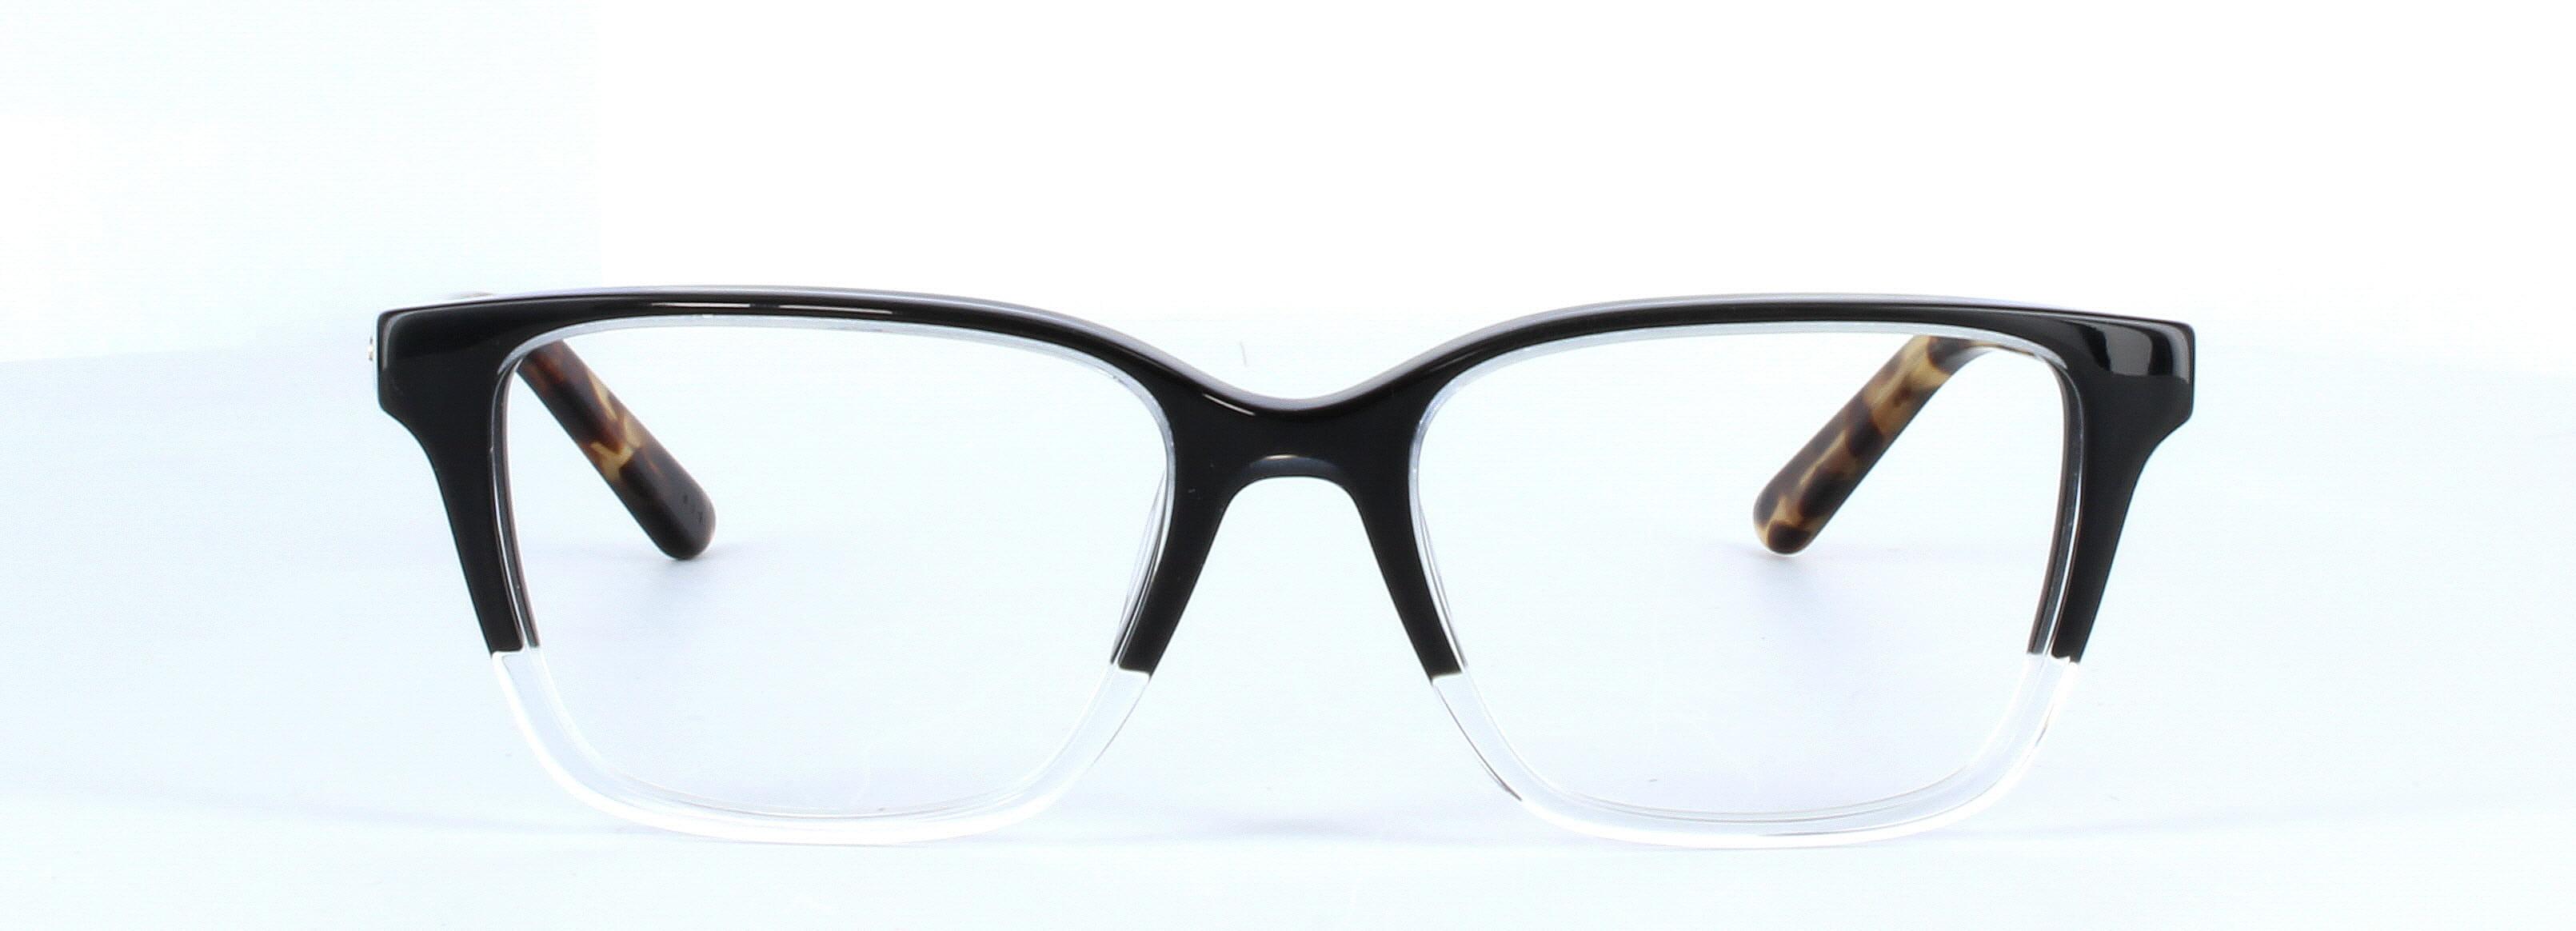 CK19506-095 - Unisex 2-tone acetate glasses with spring hinged arms - Black & crystal - image view 5